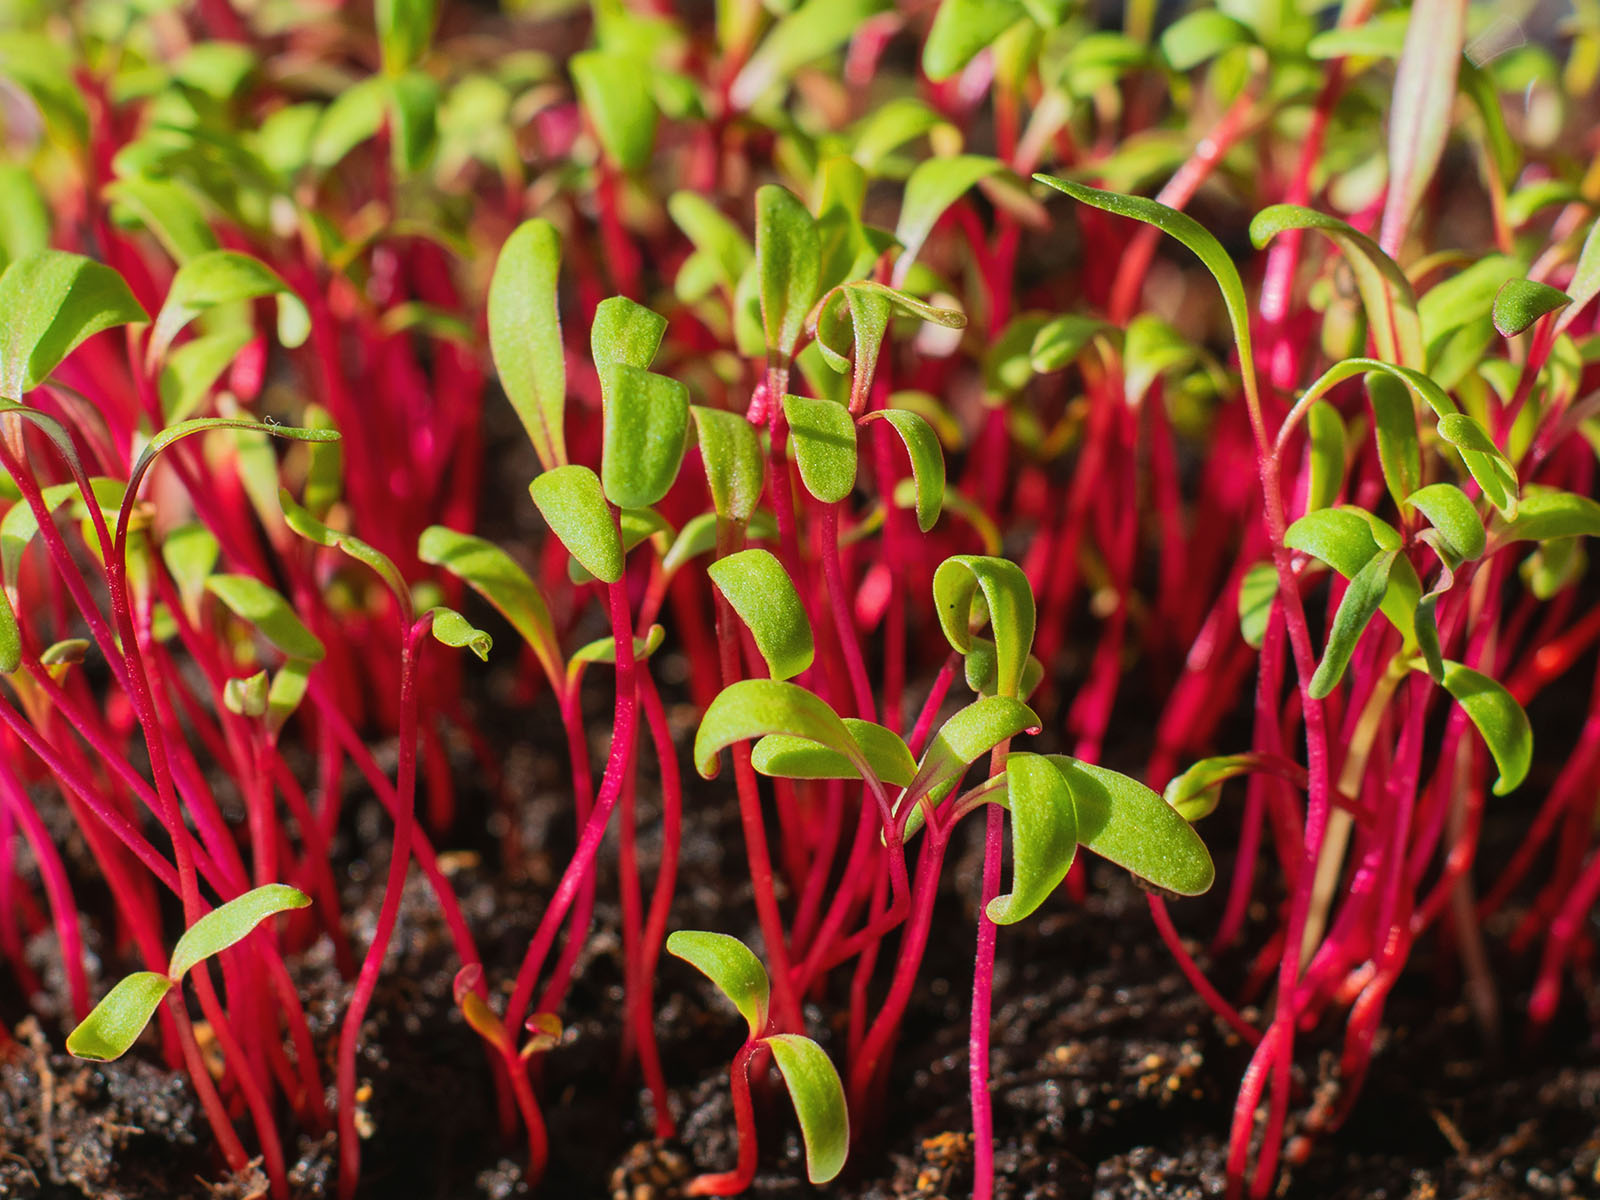 Beetroot sprouts with green tips